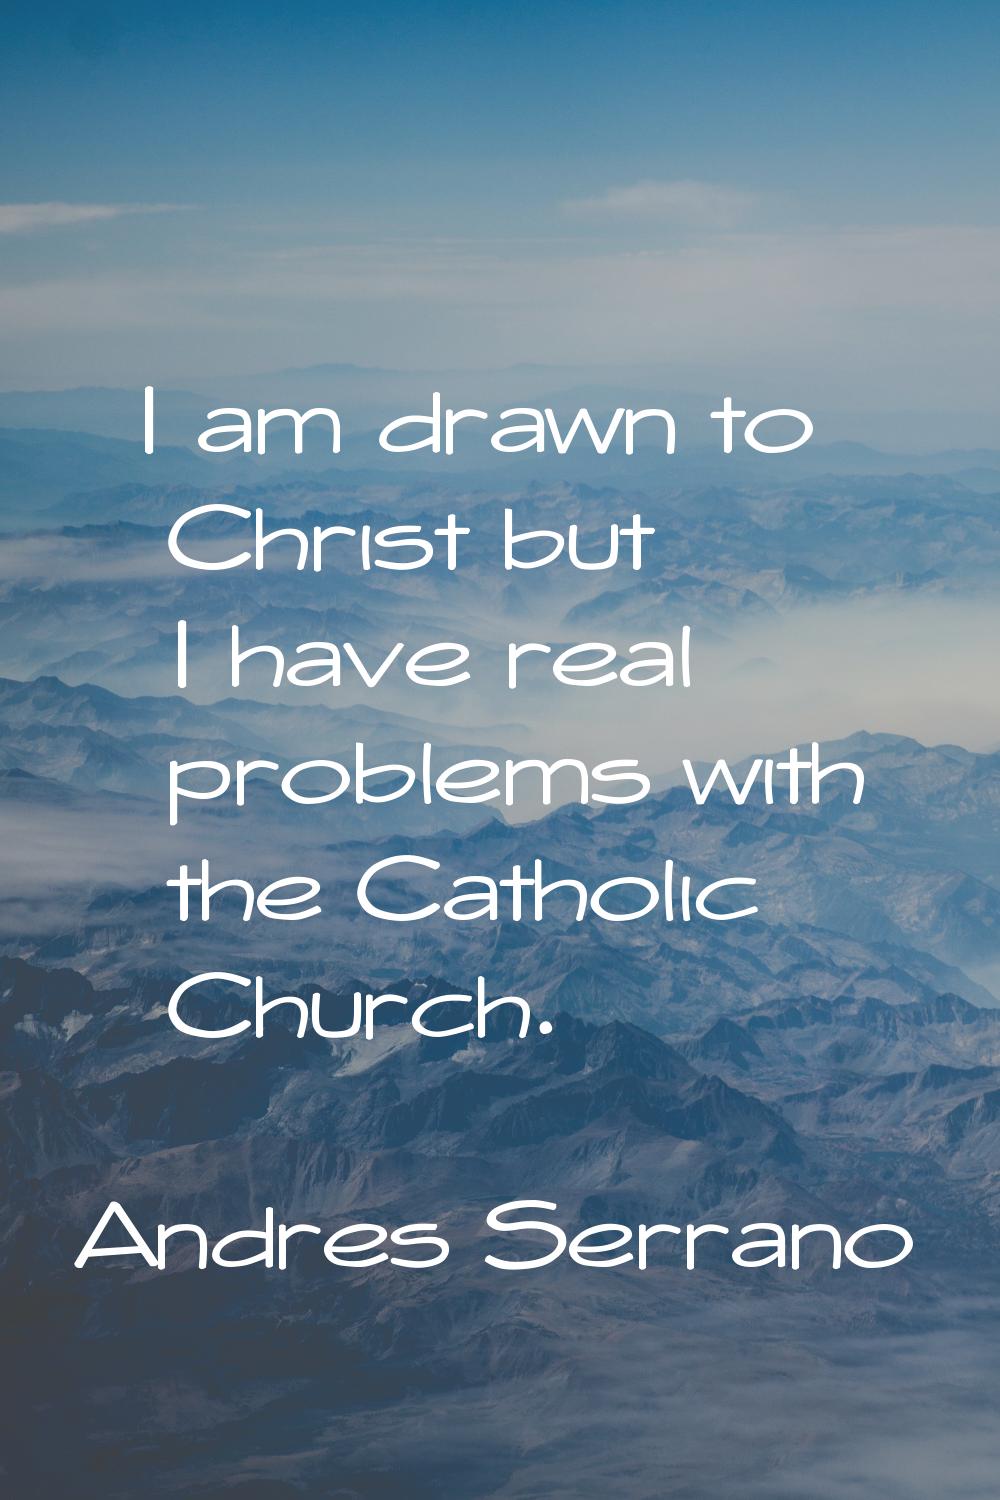 I am drawn to Christ but I have real problems with the Catholic Church.